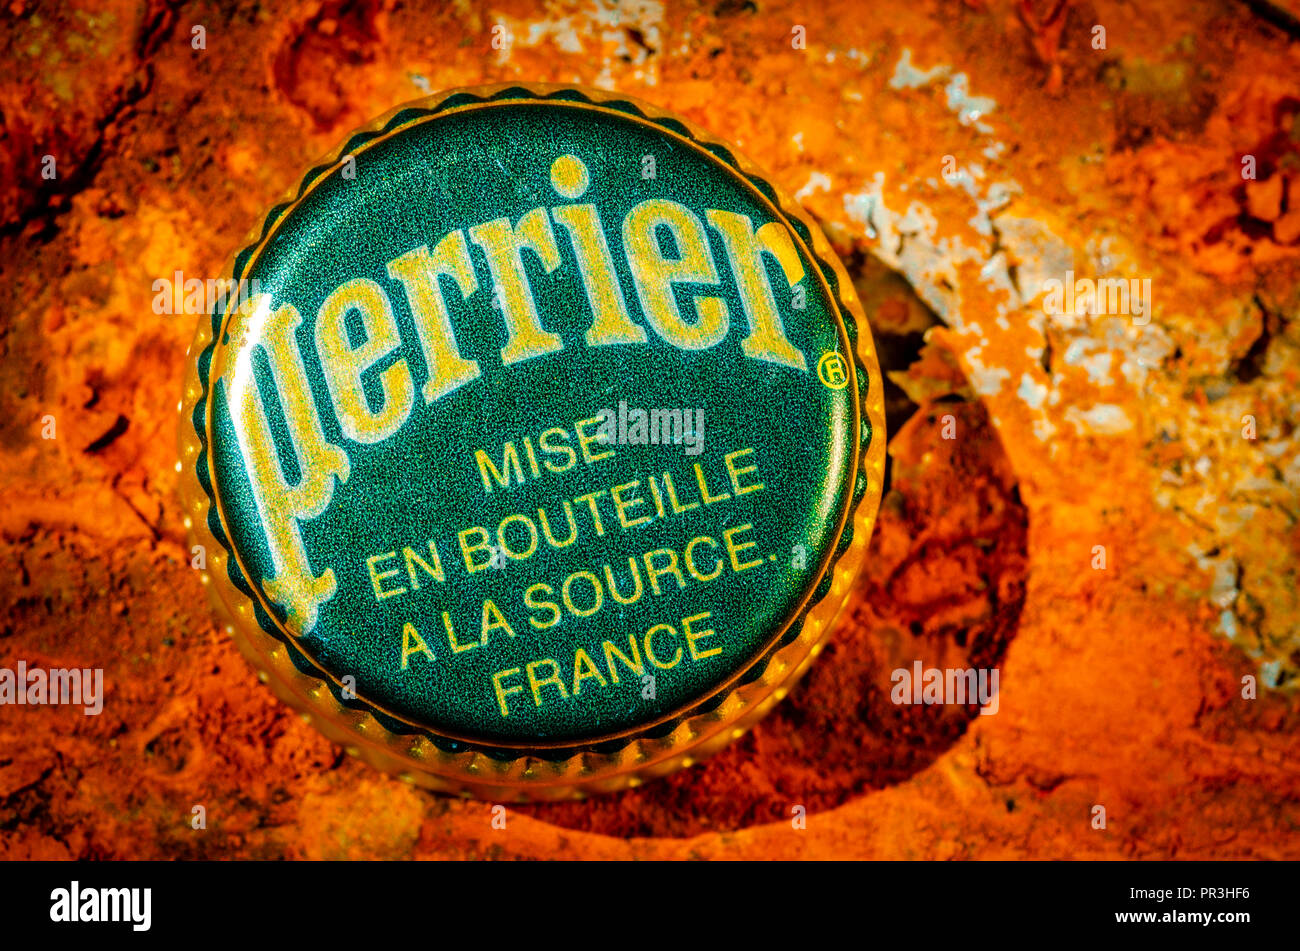 Perrier Bottle Top, Perrier is a French brand of natural mineral water from it's source in Vergeze. Stock Photo